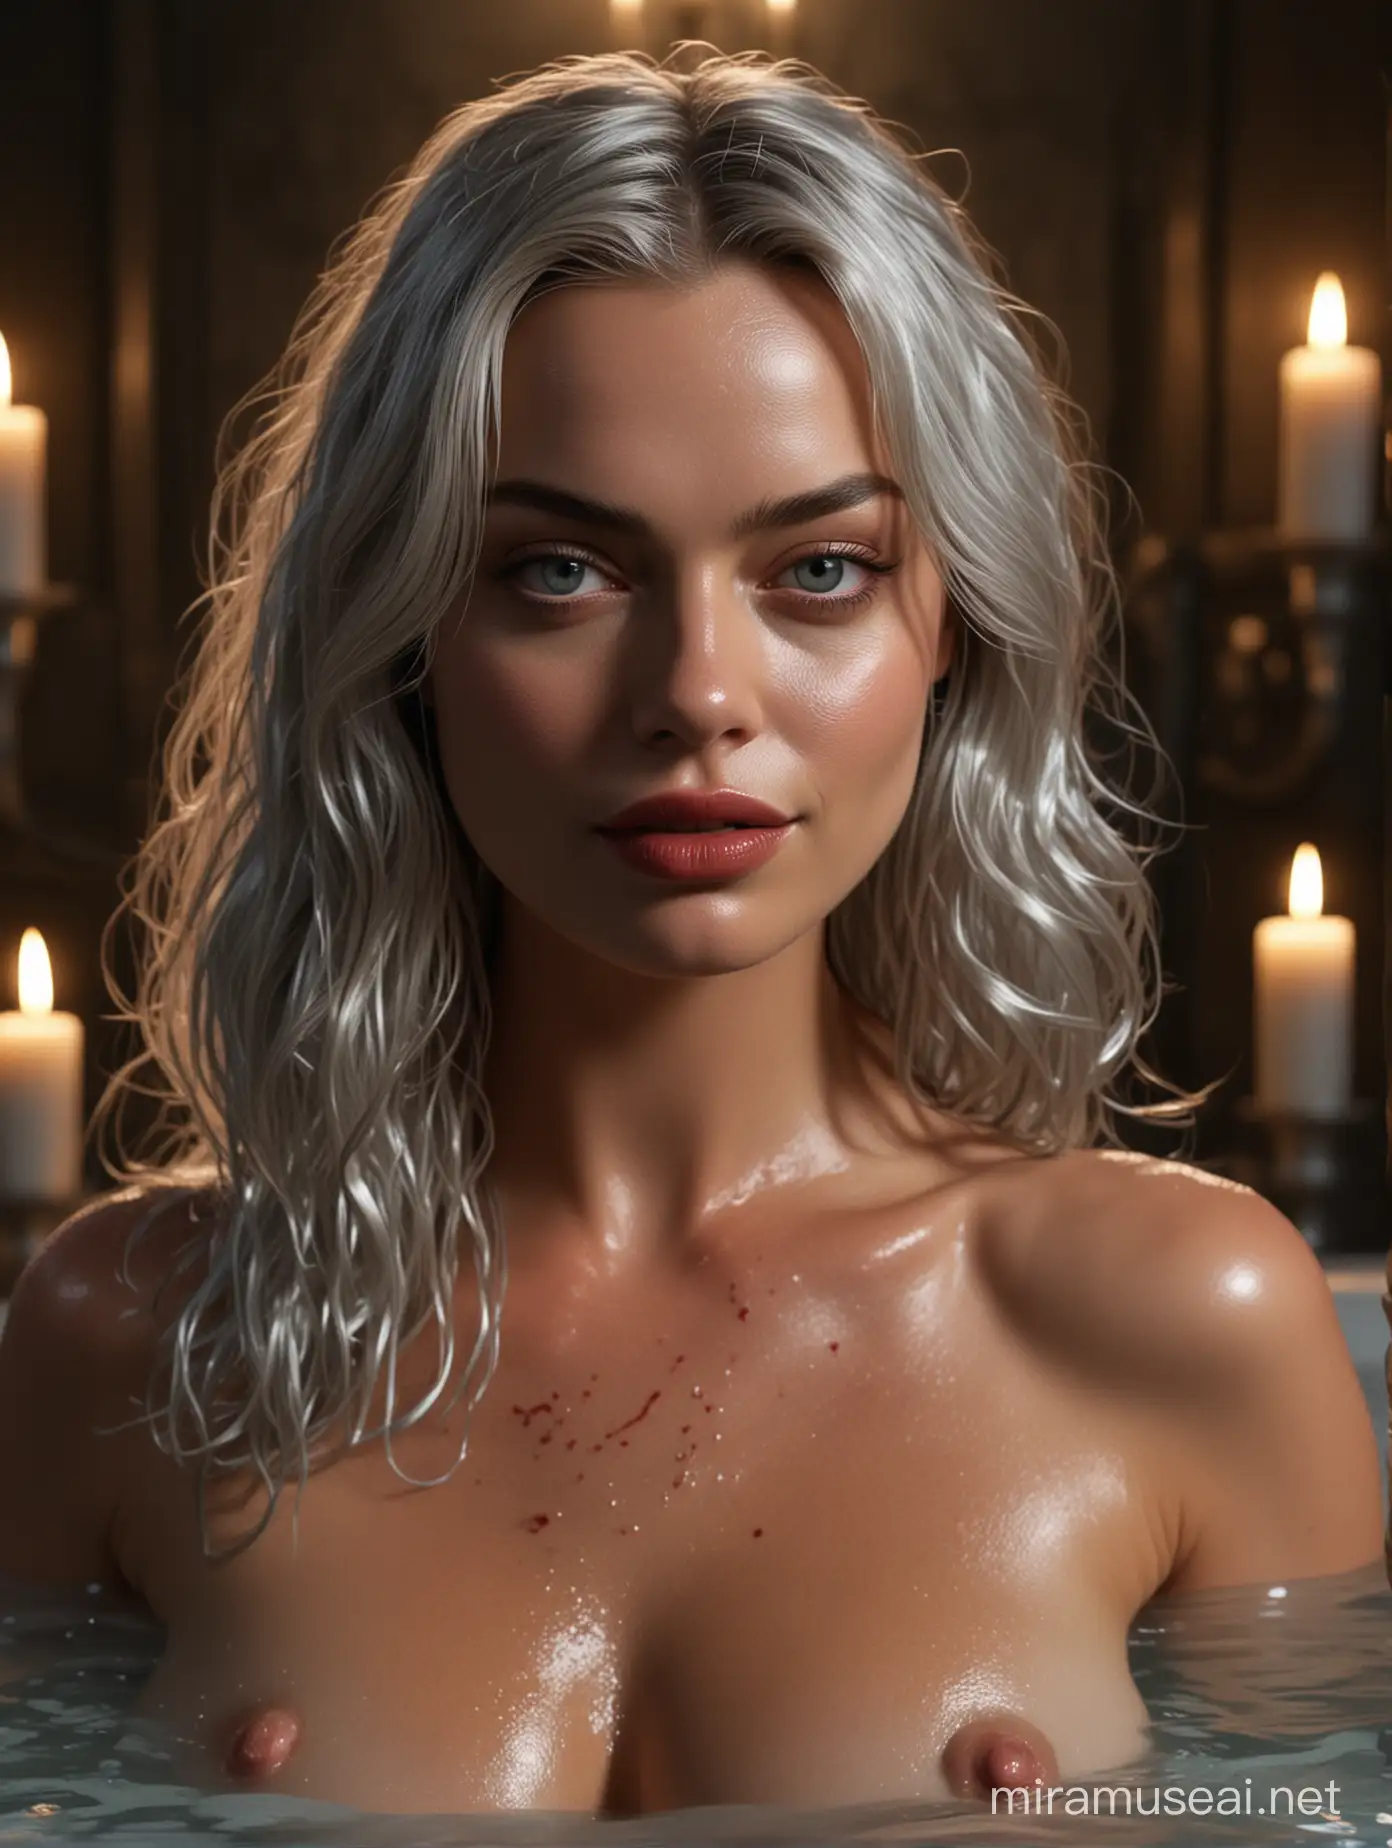 Produce a hyperrealistic 3D model of Margot Robbie with silver long wavy hair, naked and taking a bath in a blood, she is in a dark room lit up with candles